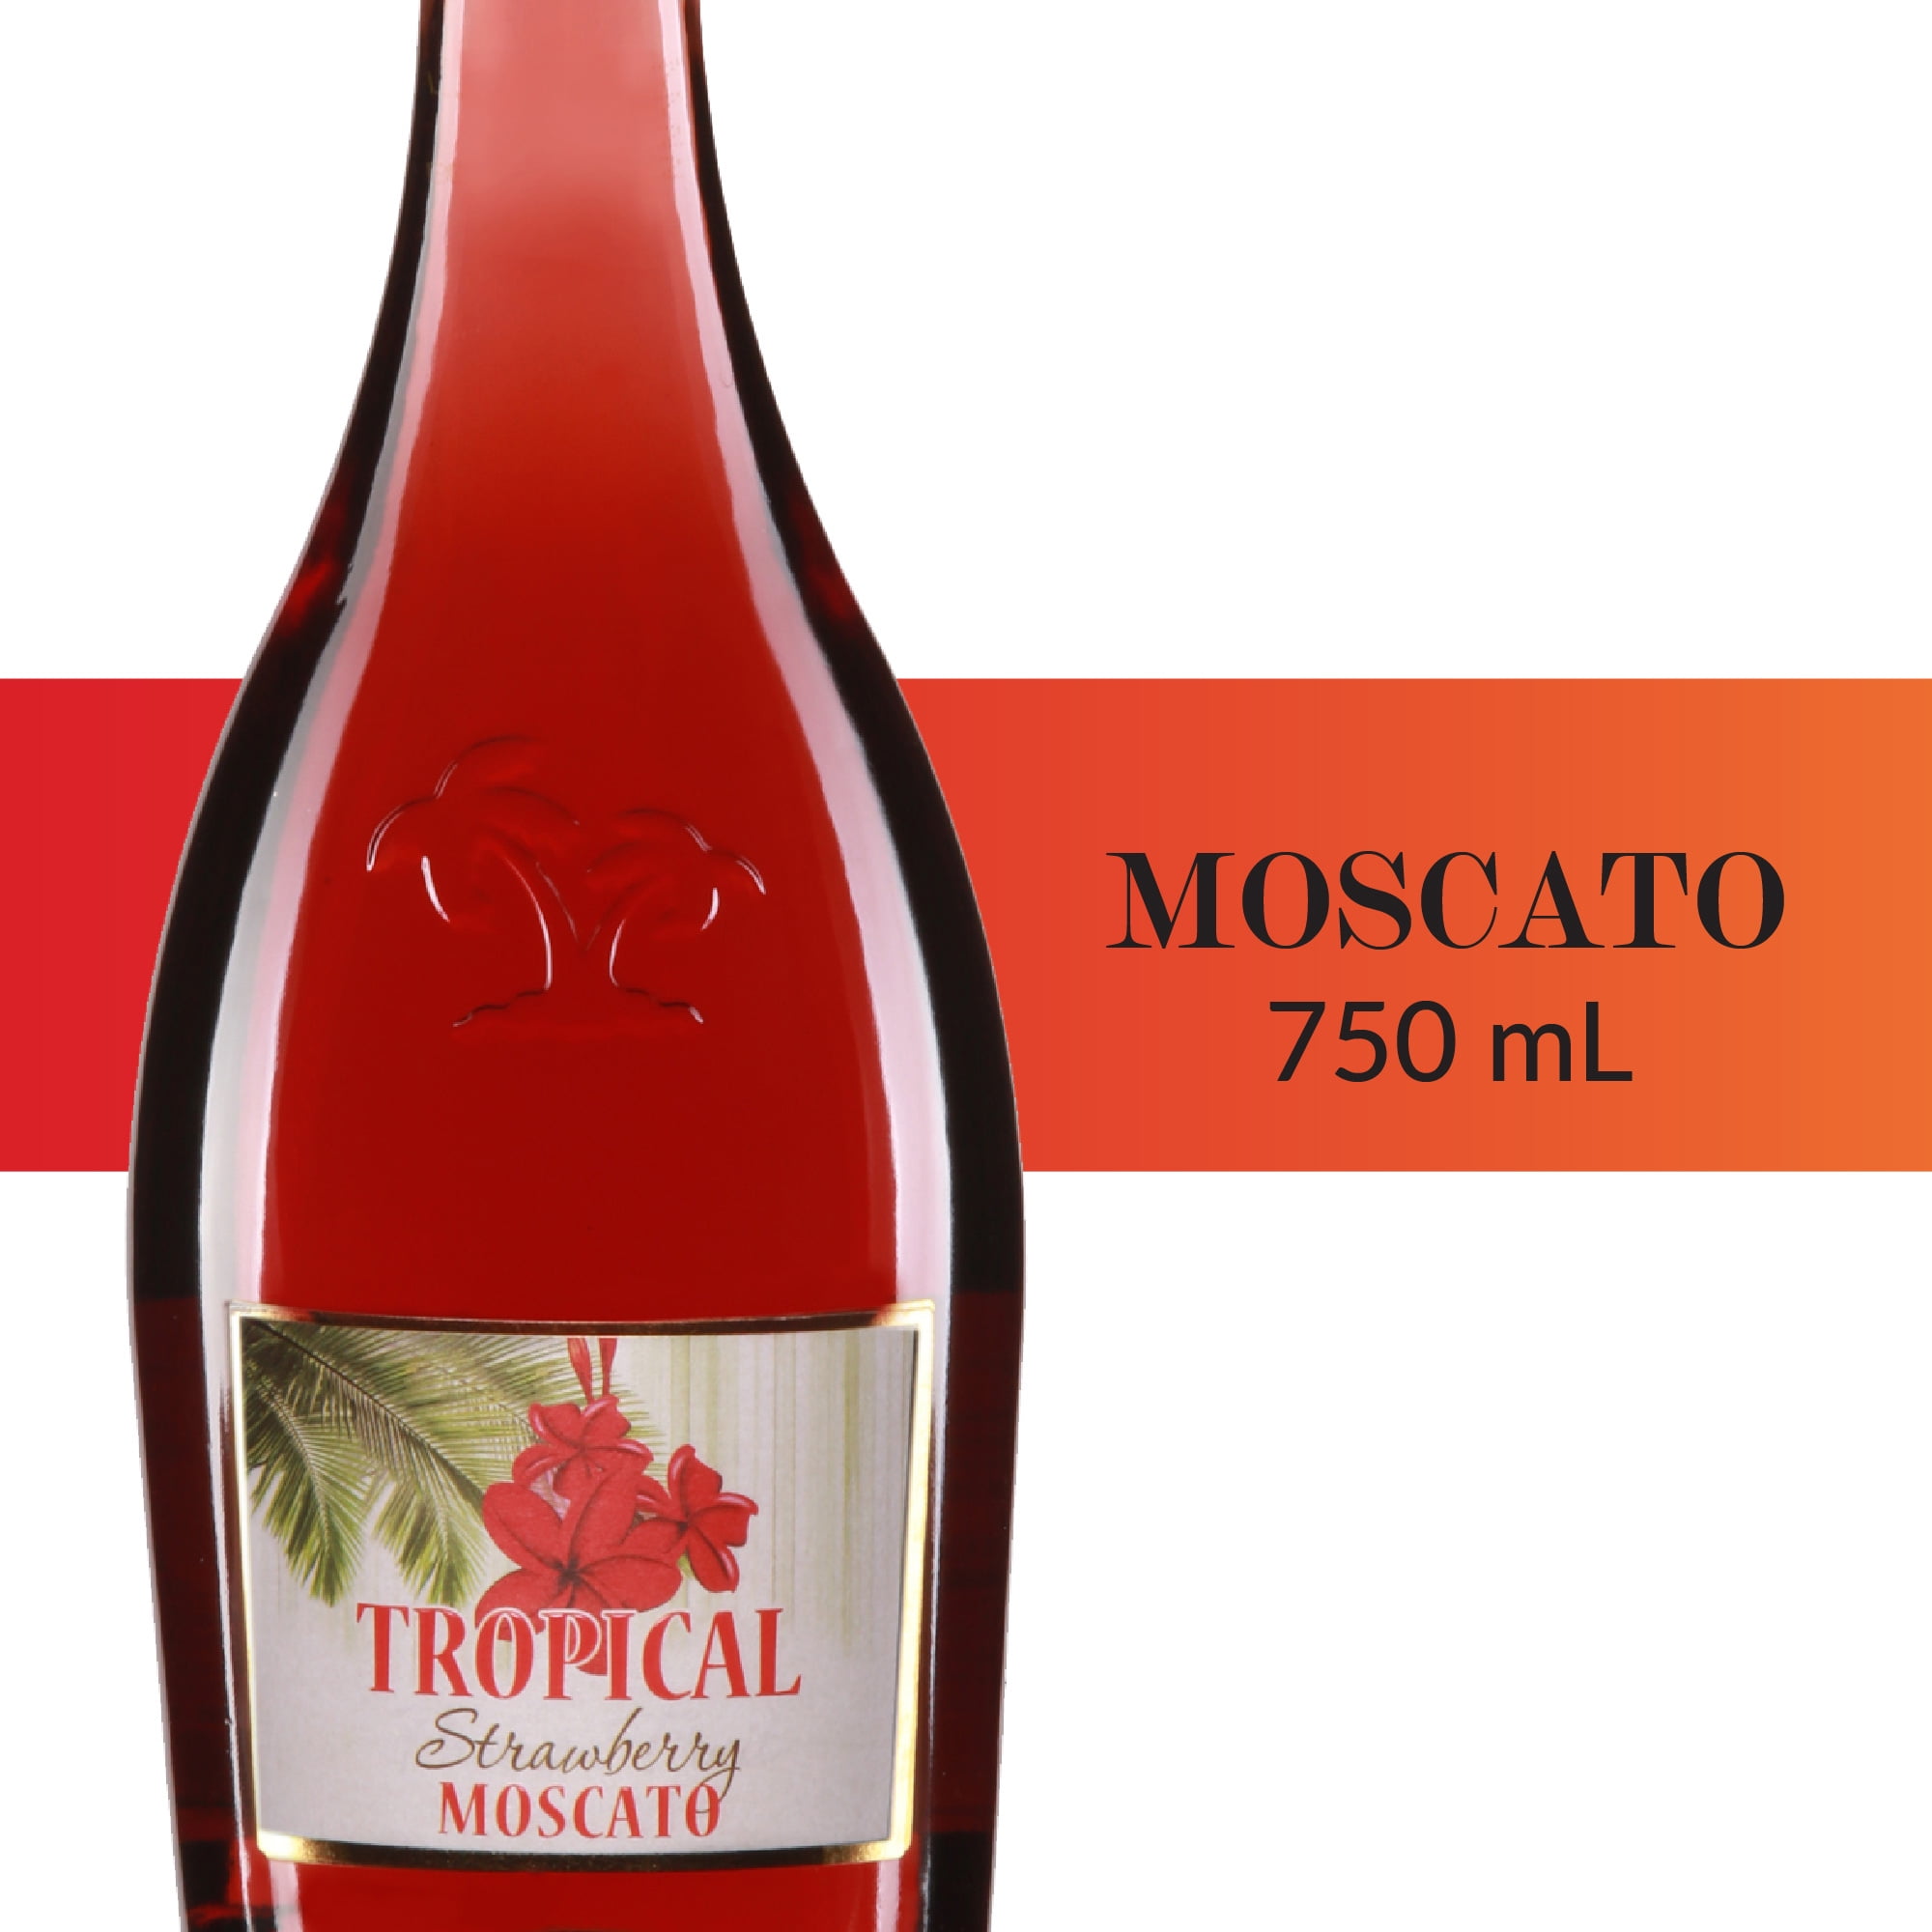 Tropical Moscato Strawberry Flavored Wine Italy, 750 ml Bottle, ABV 5.